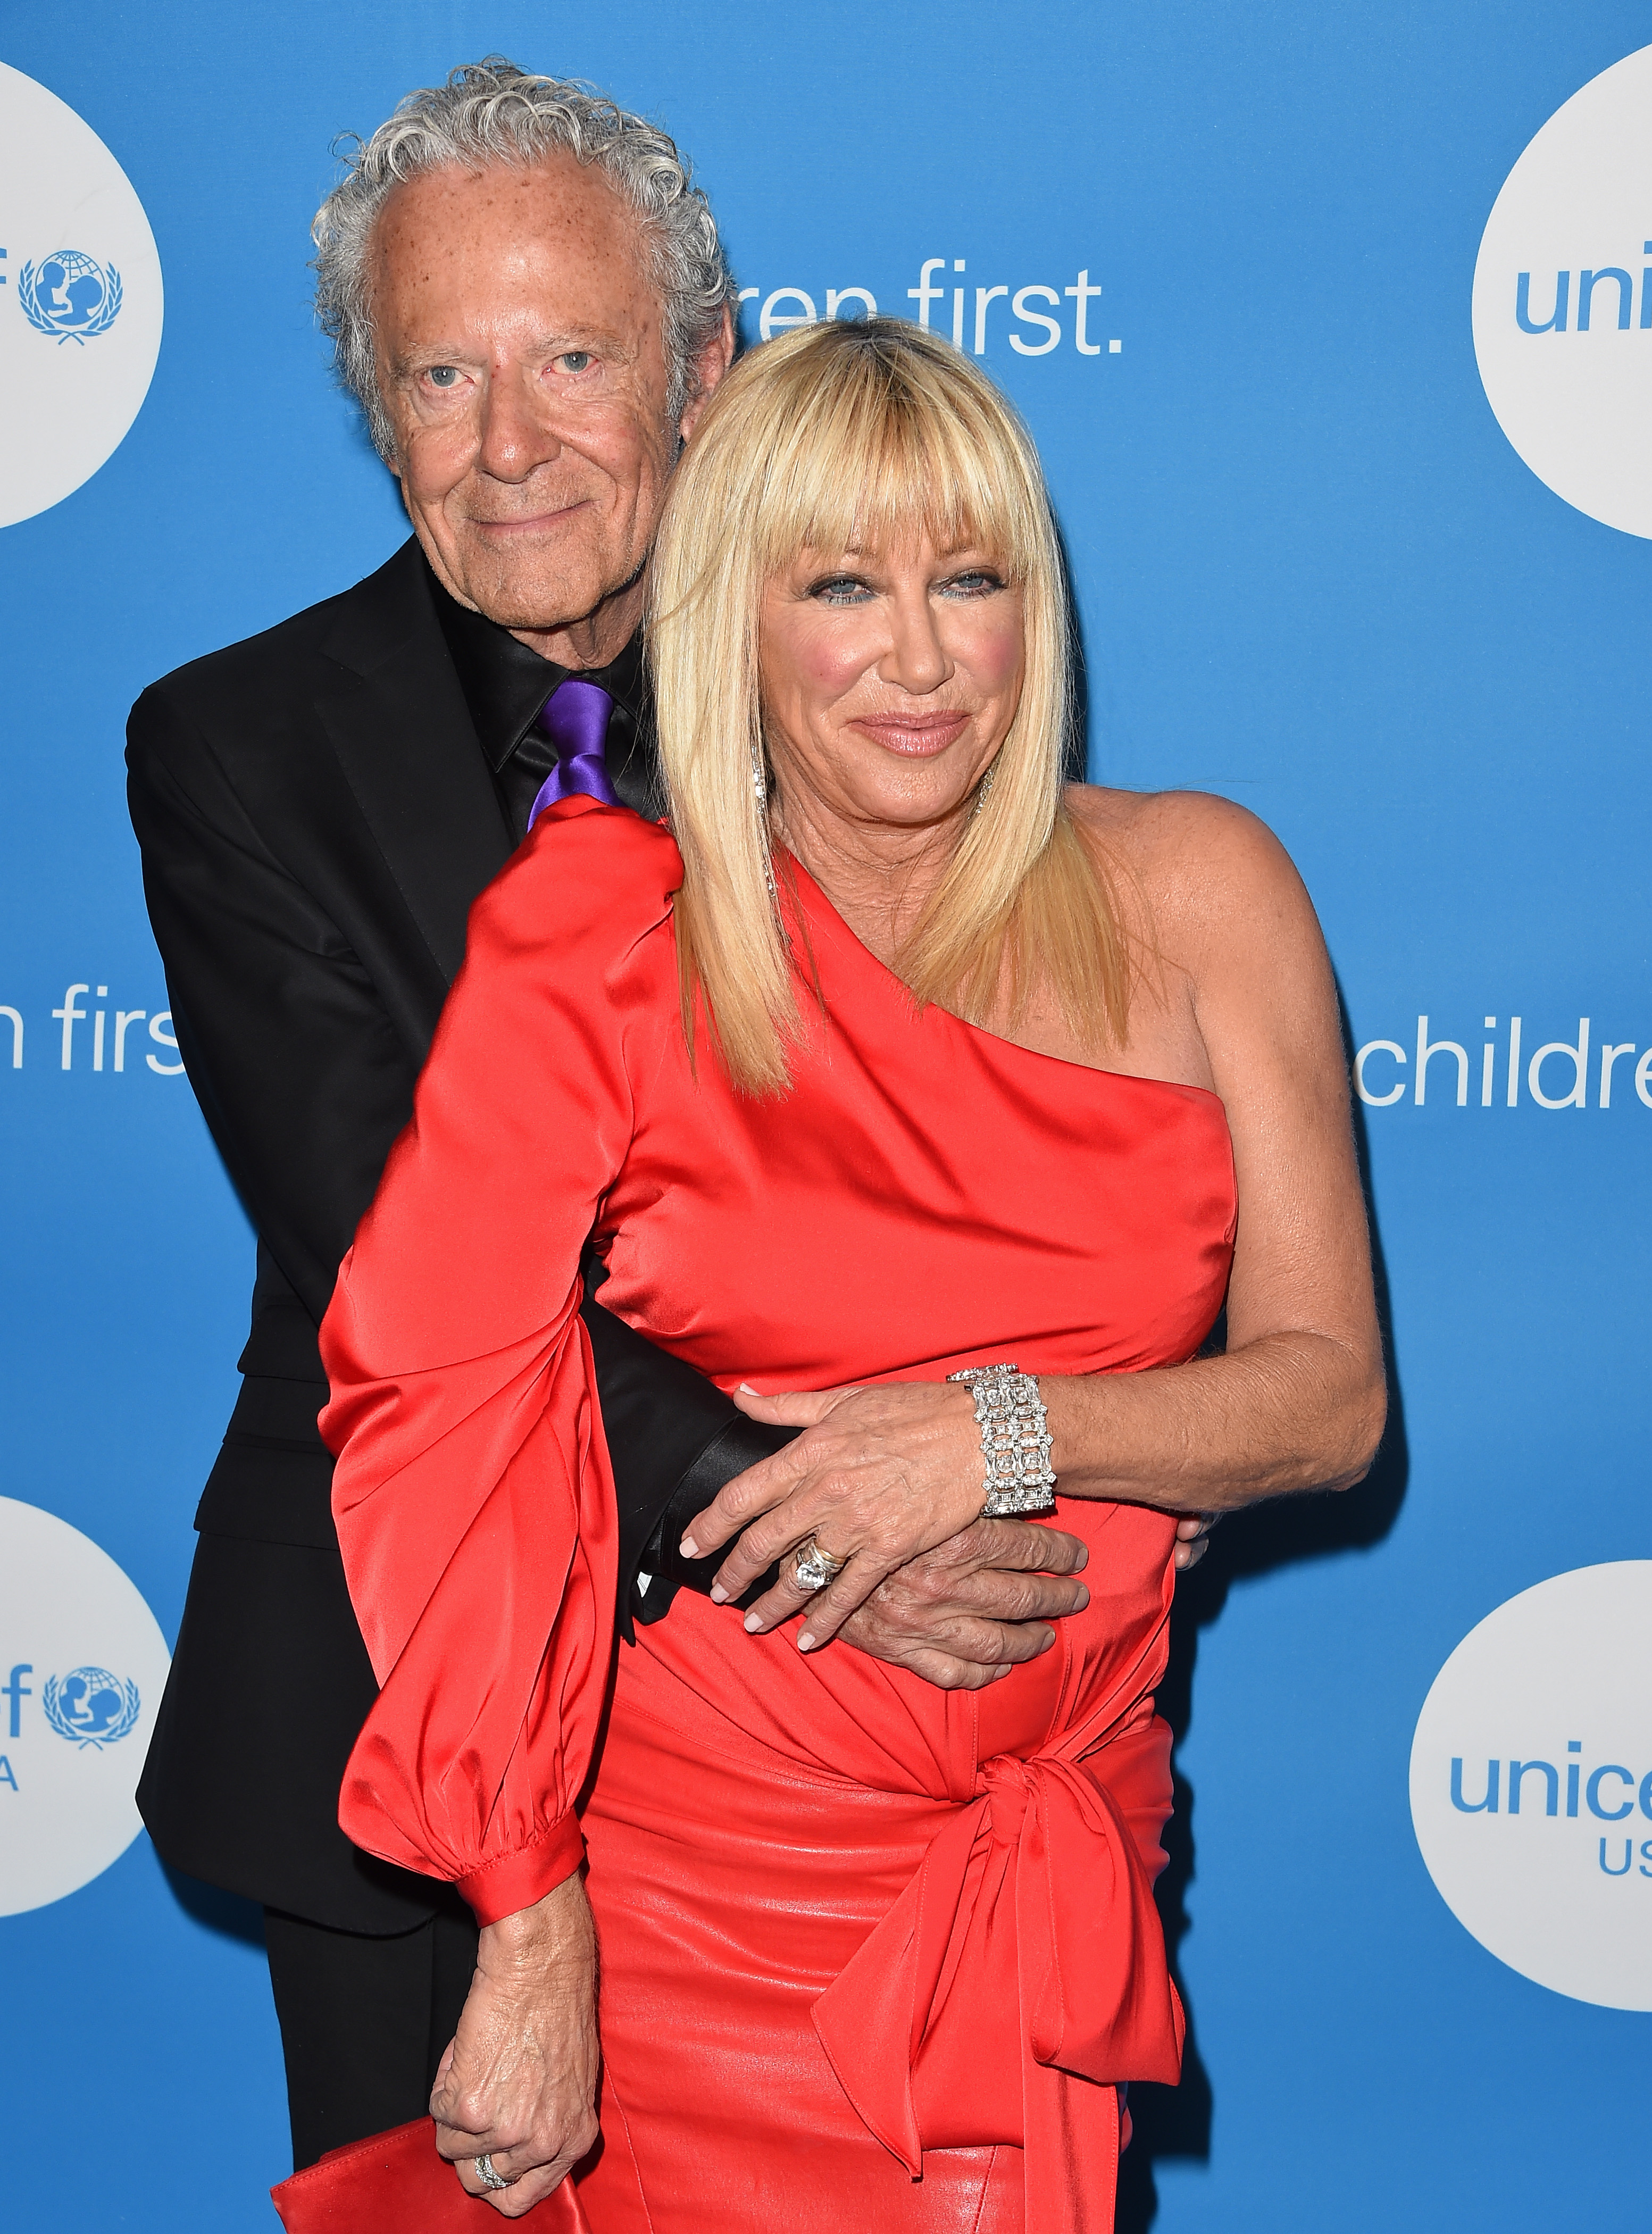 Alan Hamel and Suzanne Somers at the 7th Biennial UNICEF Ball Los Angeles | Source: Getty Images